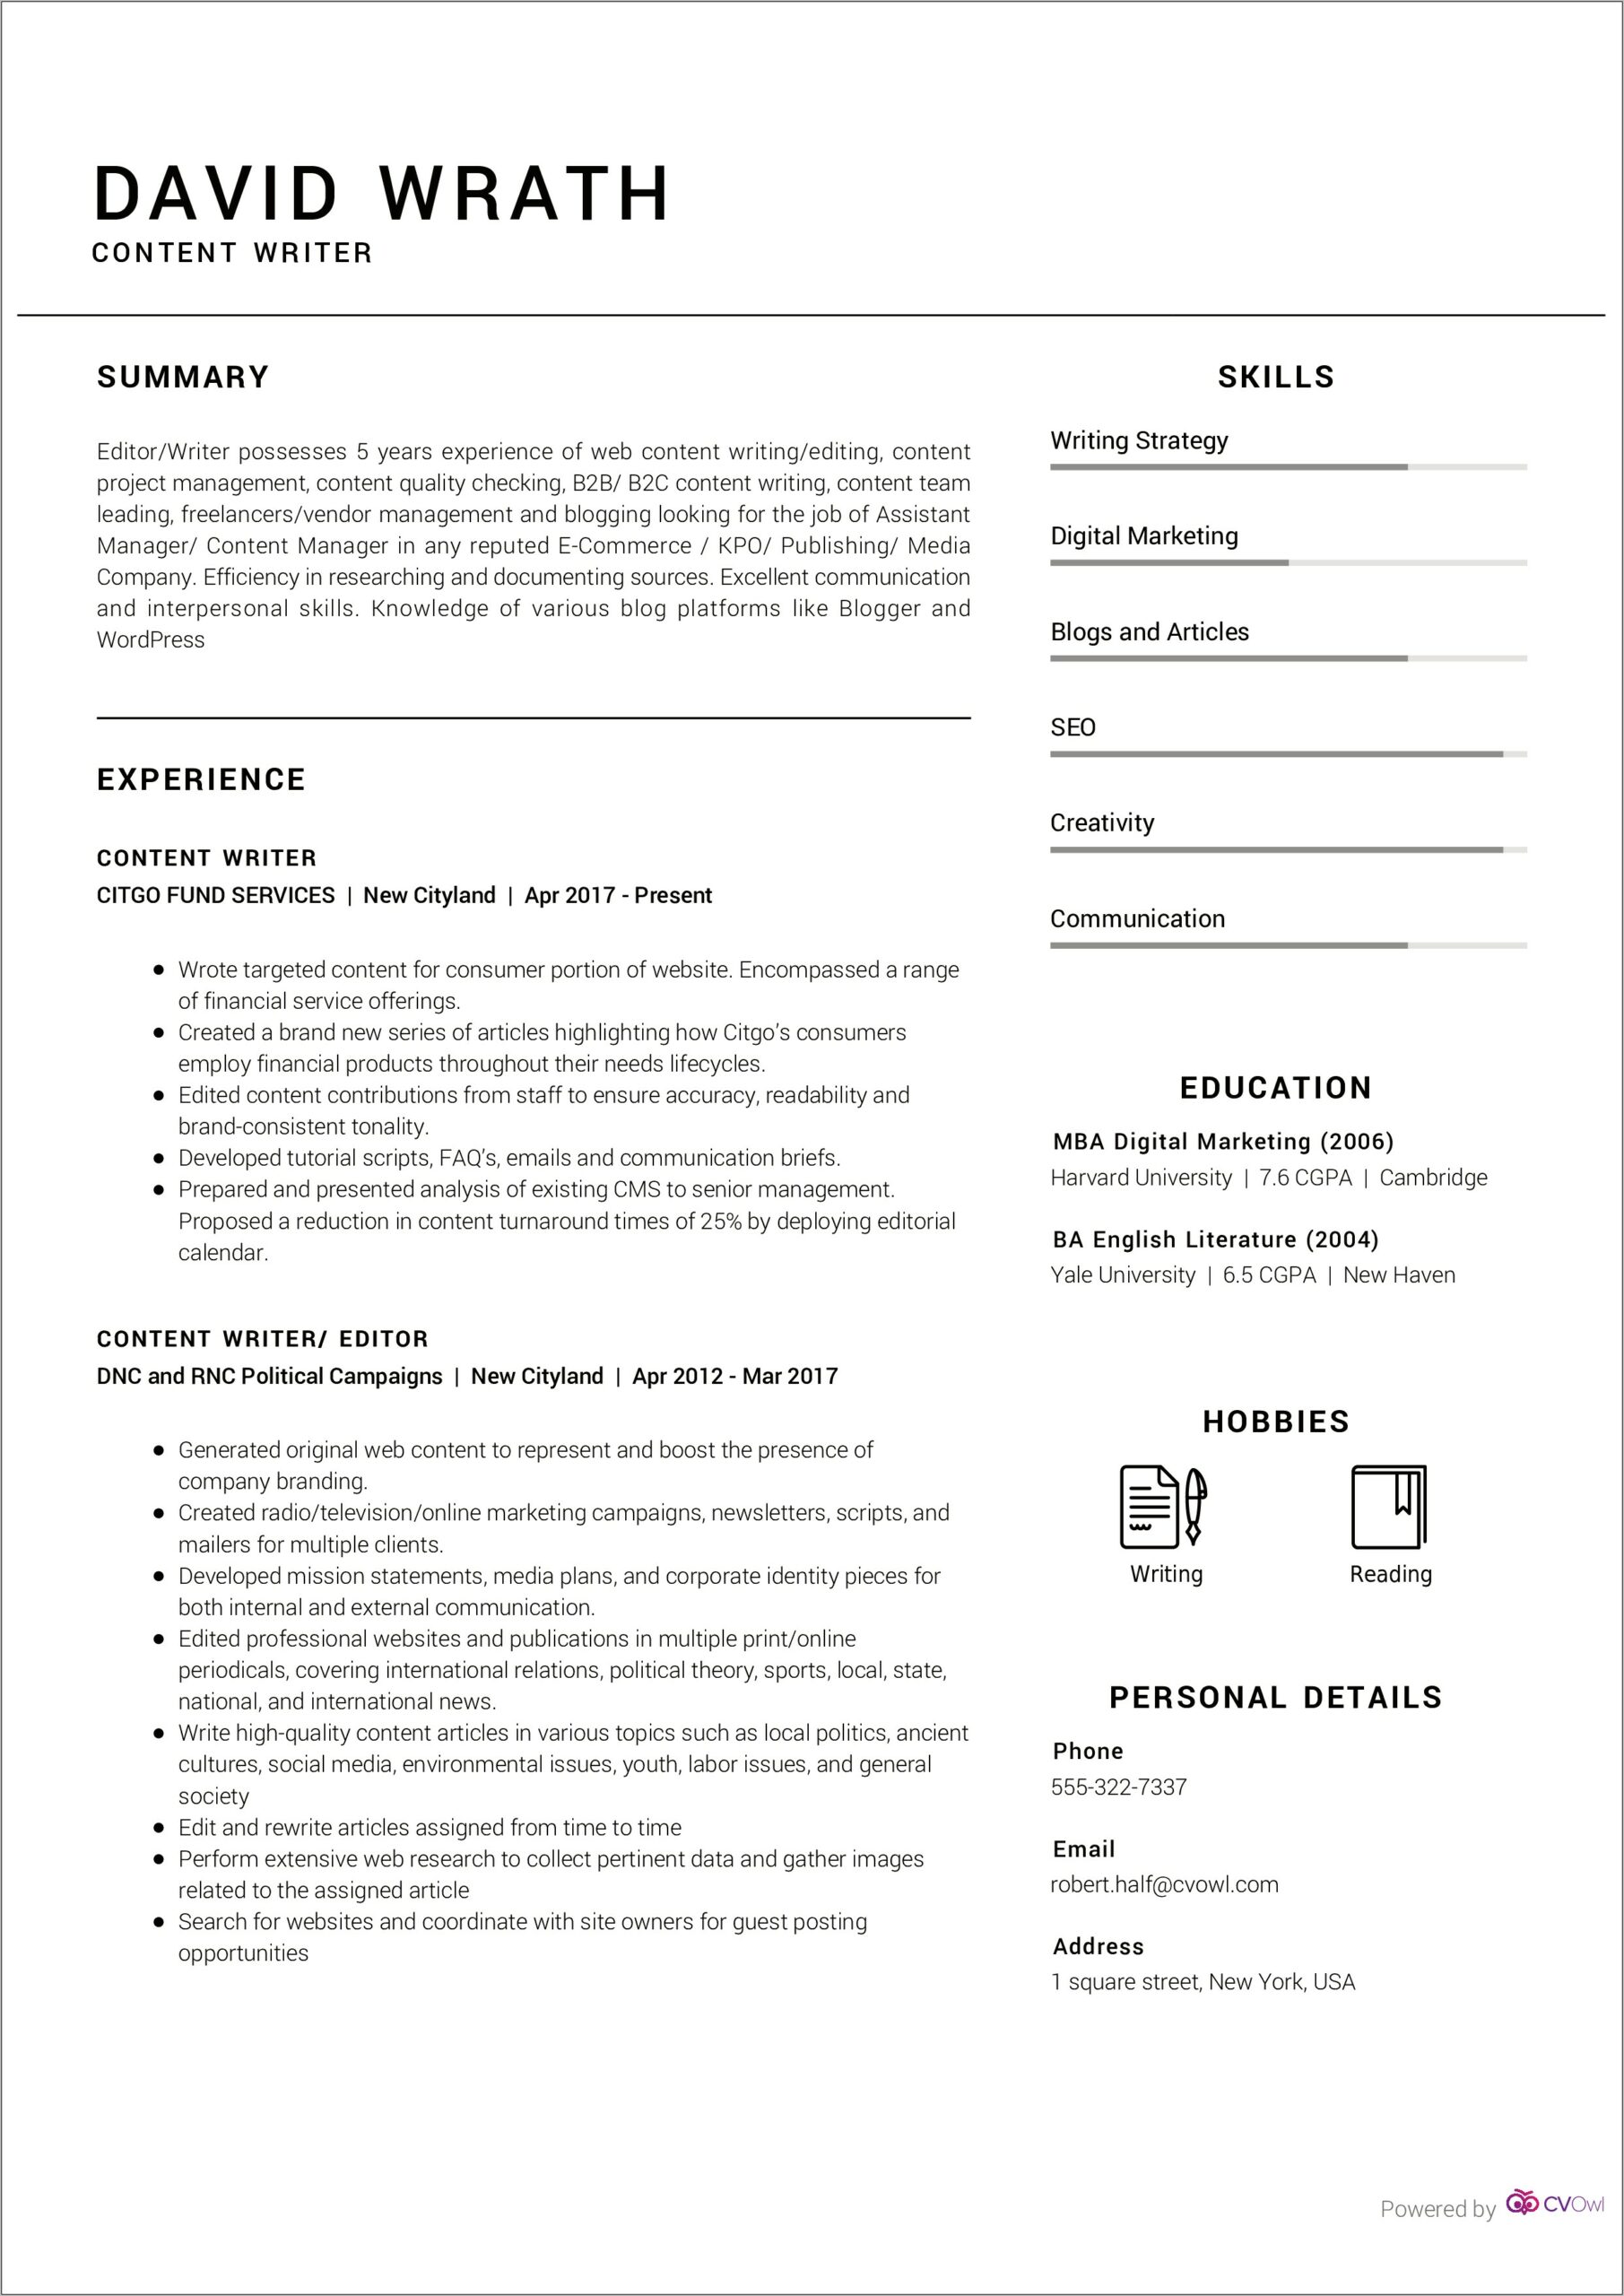 Sample Resume For Fresh Graduates With No Experience